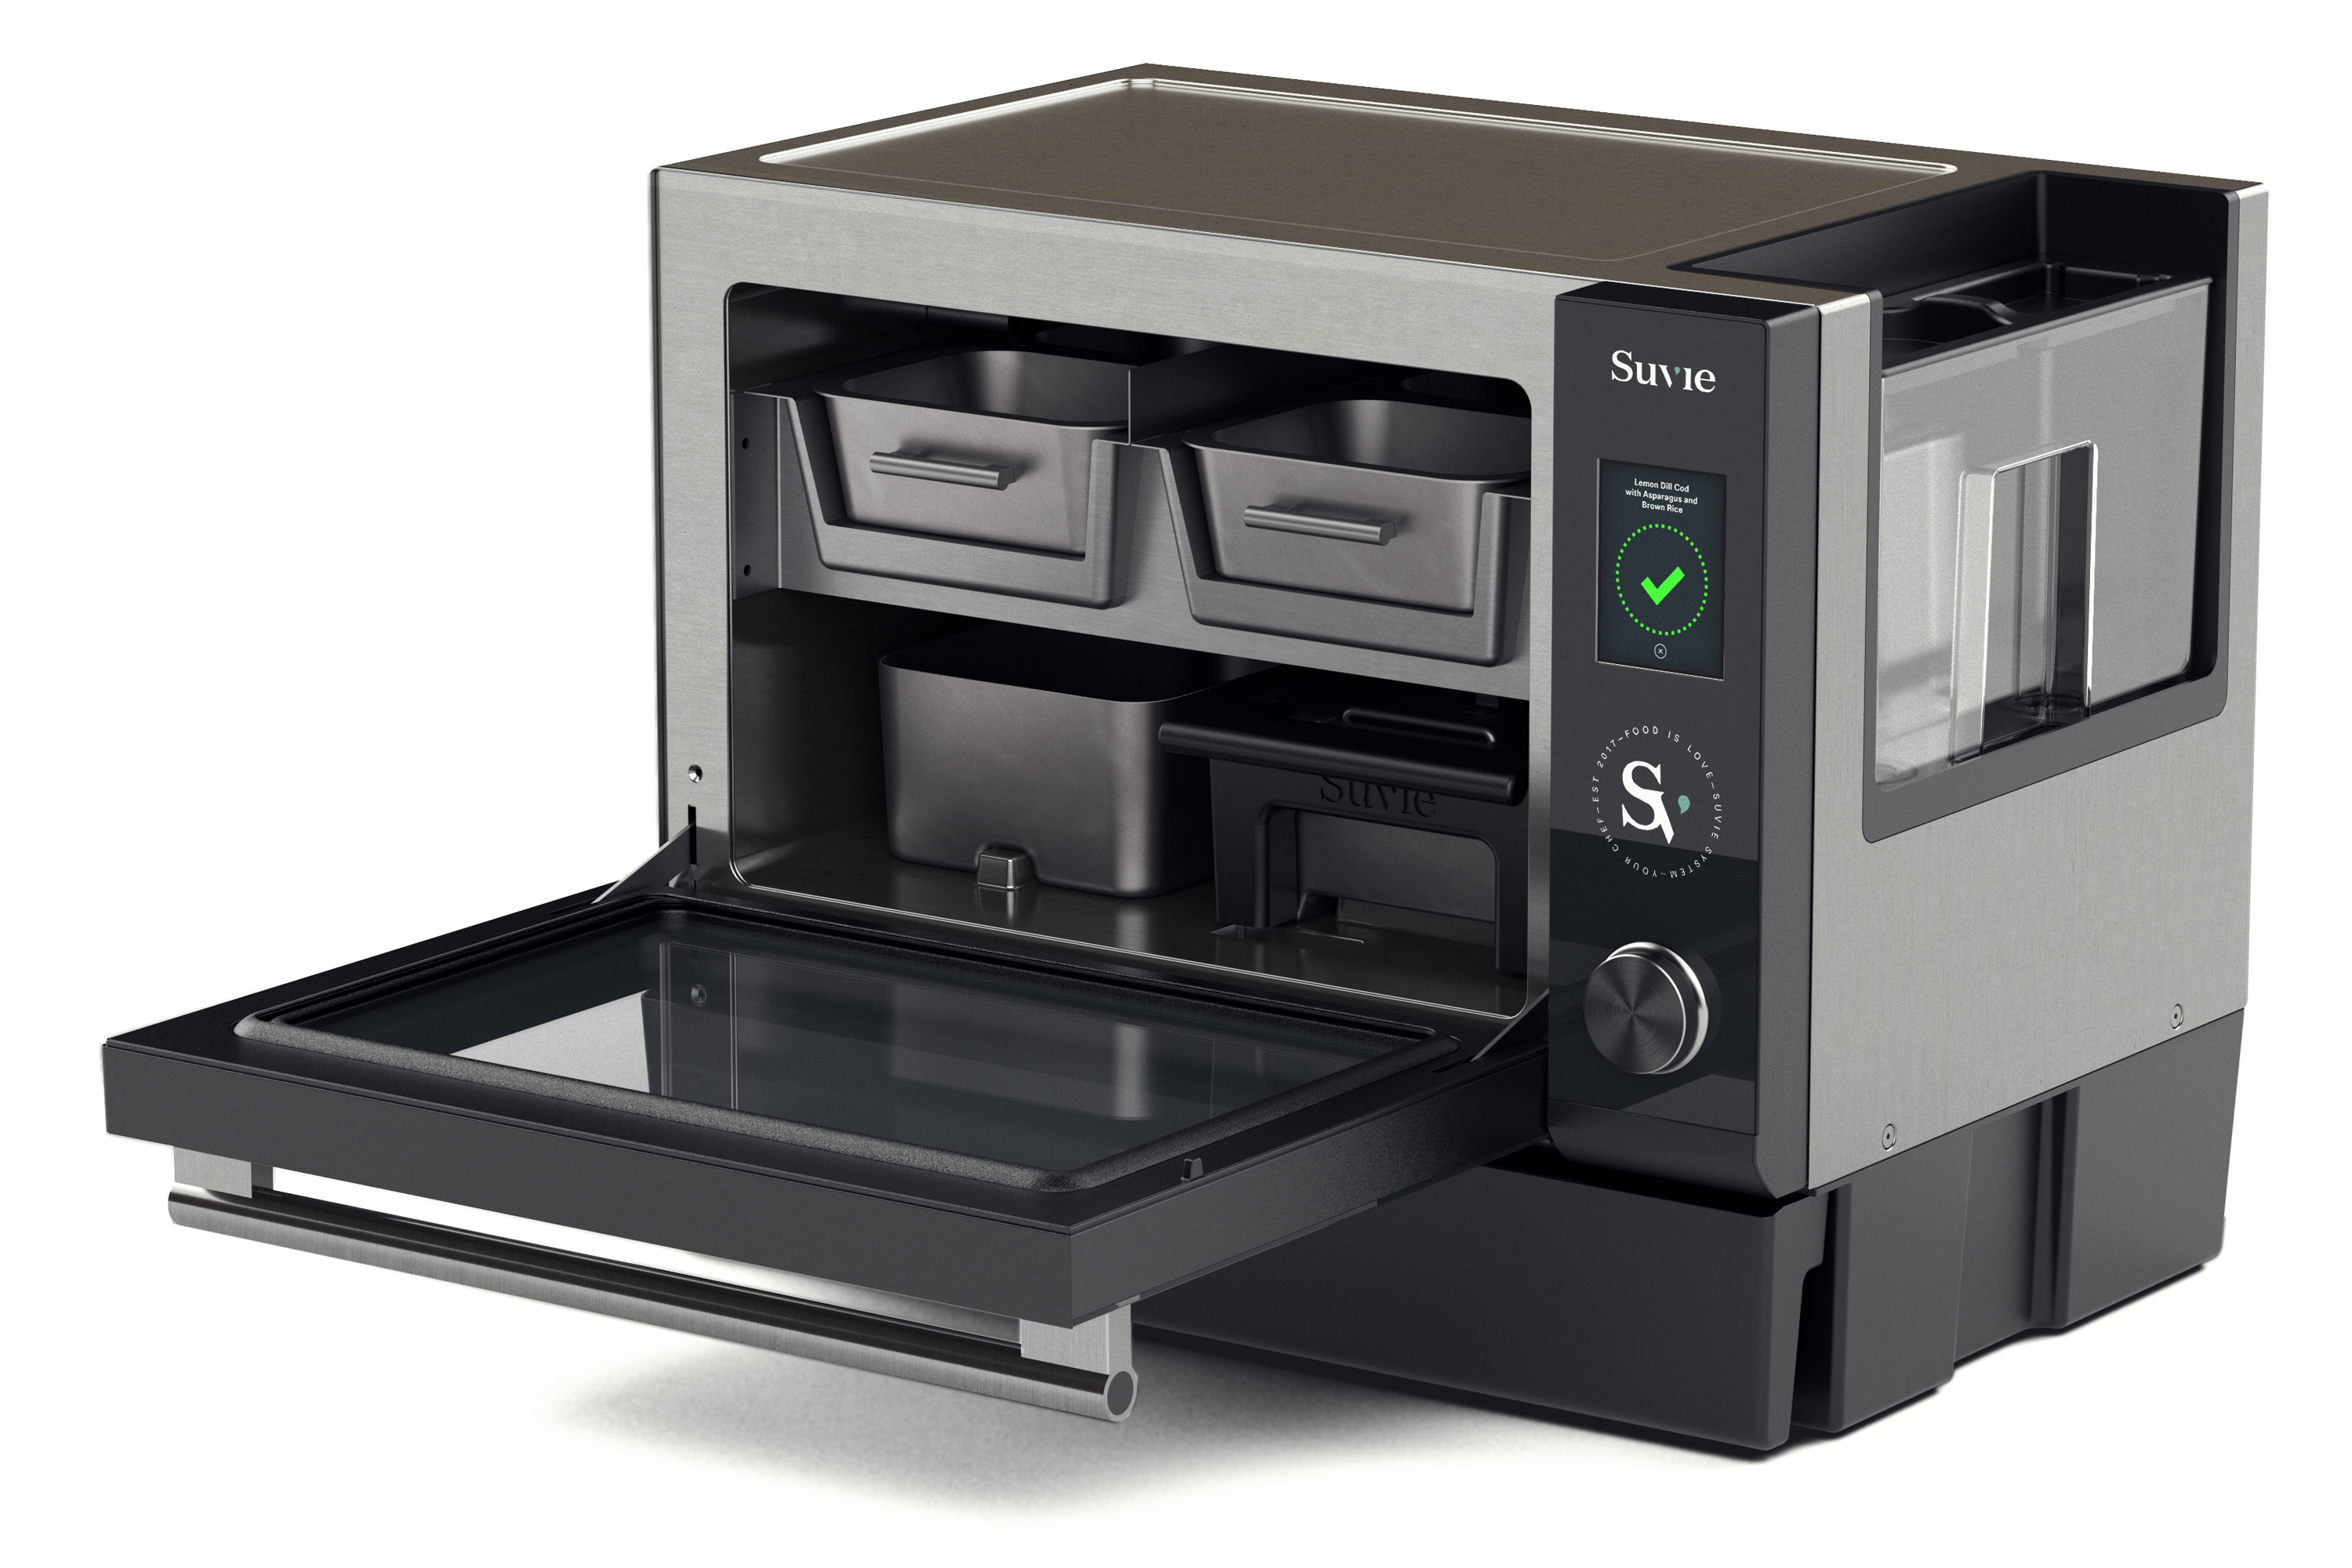 Revolutionary Kitchen Robot Suvie™ Makes Cooking Easy, Delicious